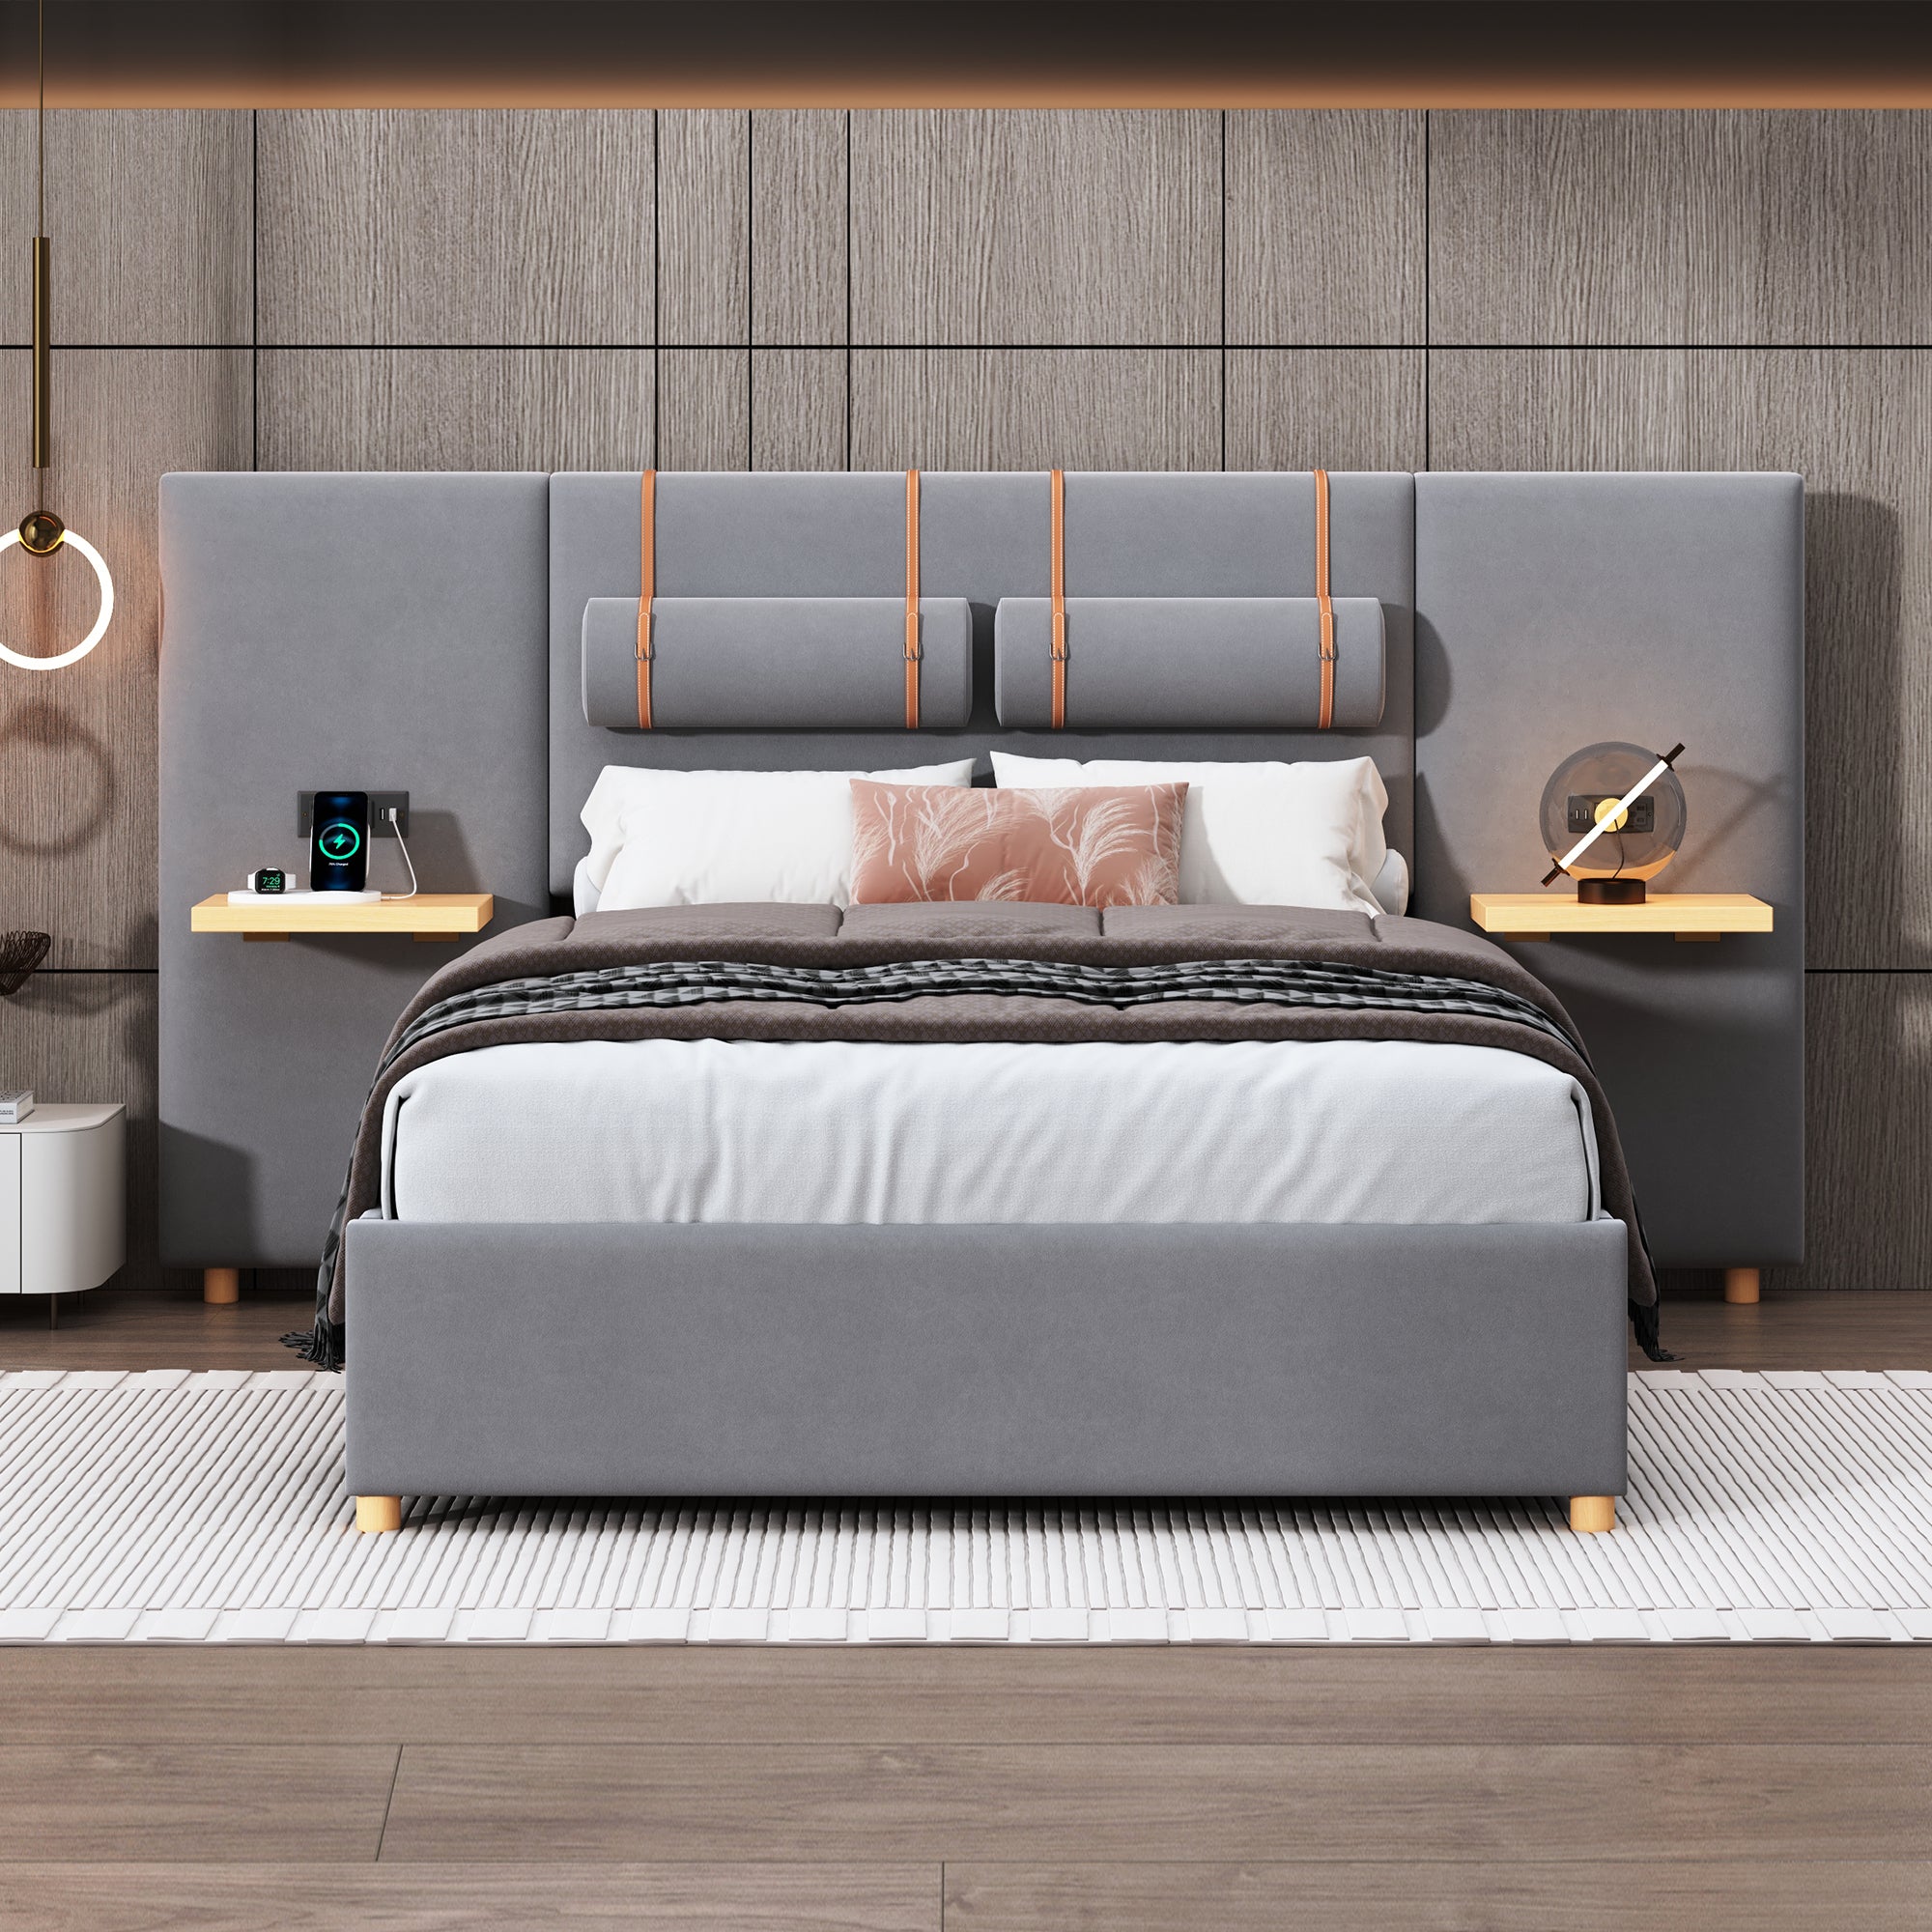 Full Size Upholstered Platform Bed With Two Outlets and USB Charging Ports on Both Sides, Two Bedside Pillows, Storage Shelf, Velvet, Gray